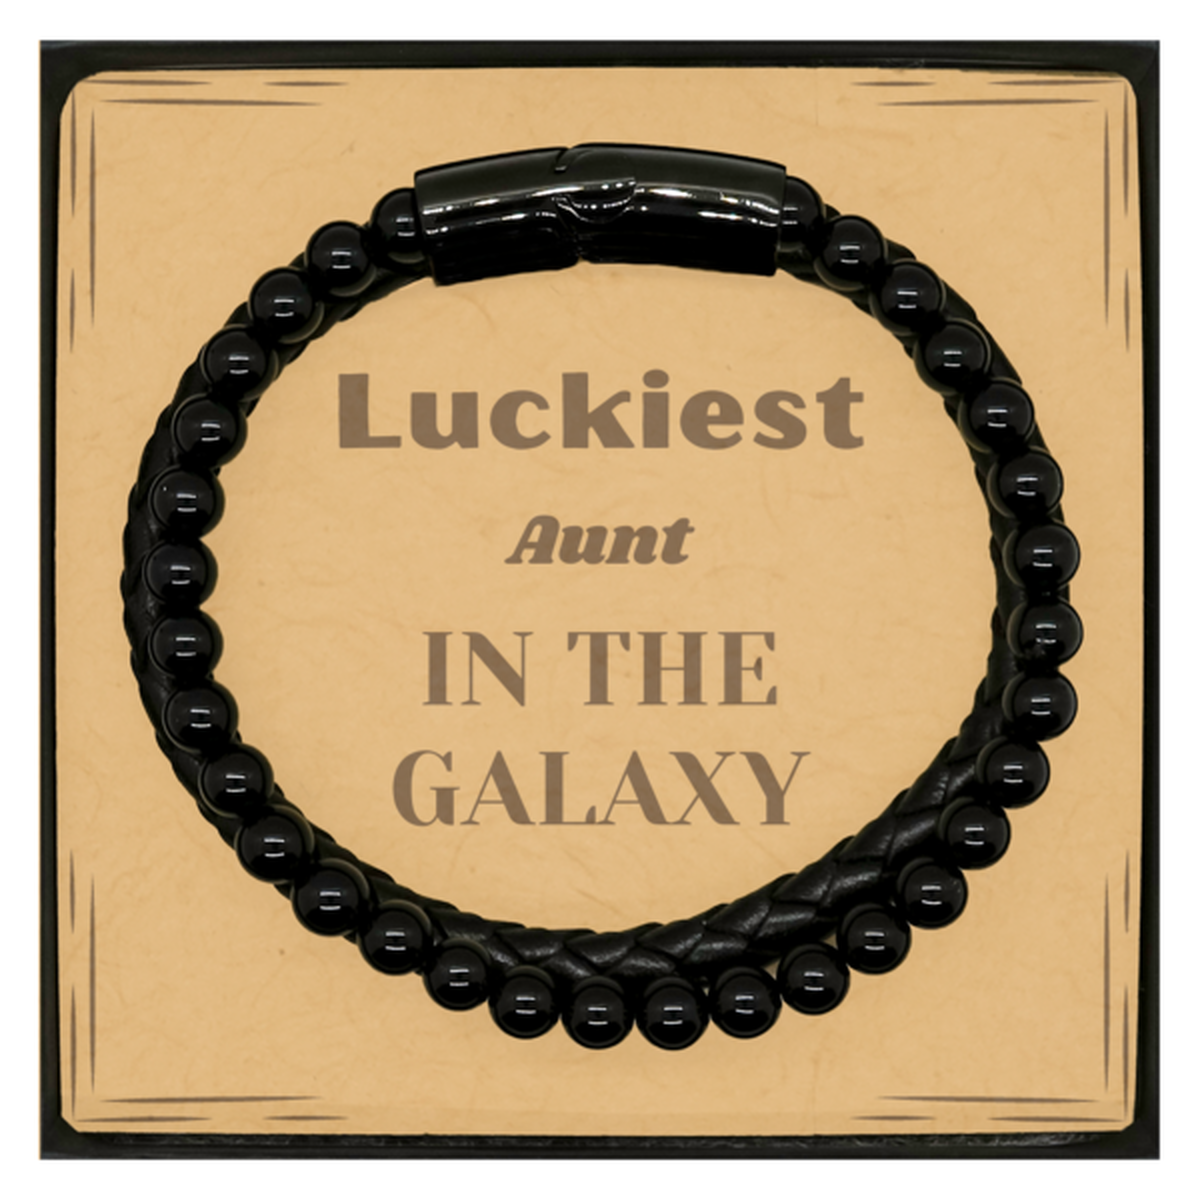 Luckiest Aunt in the Galaxy, To My Aunt Message Card Gifts, Christmas Aunt Stone Leather Bracelets Gifts, X-mas Birthday Unique Gifts For Aunt Men Women